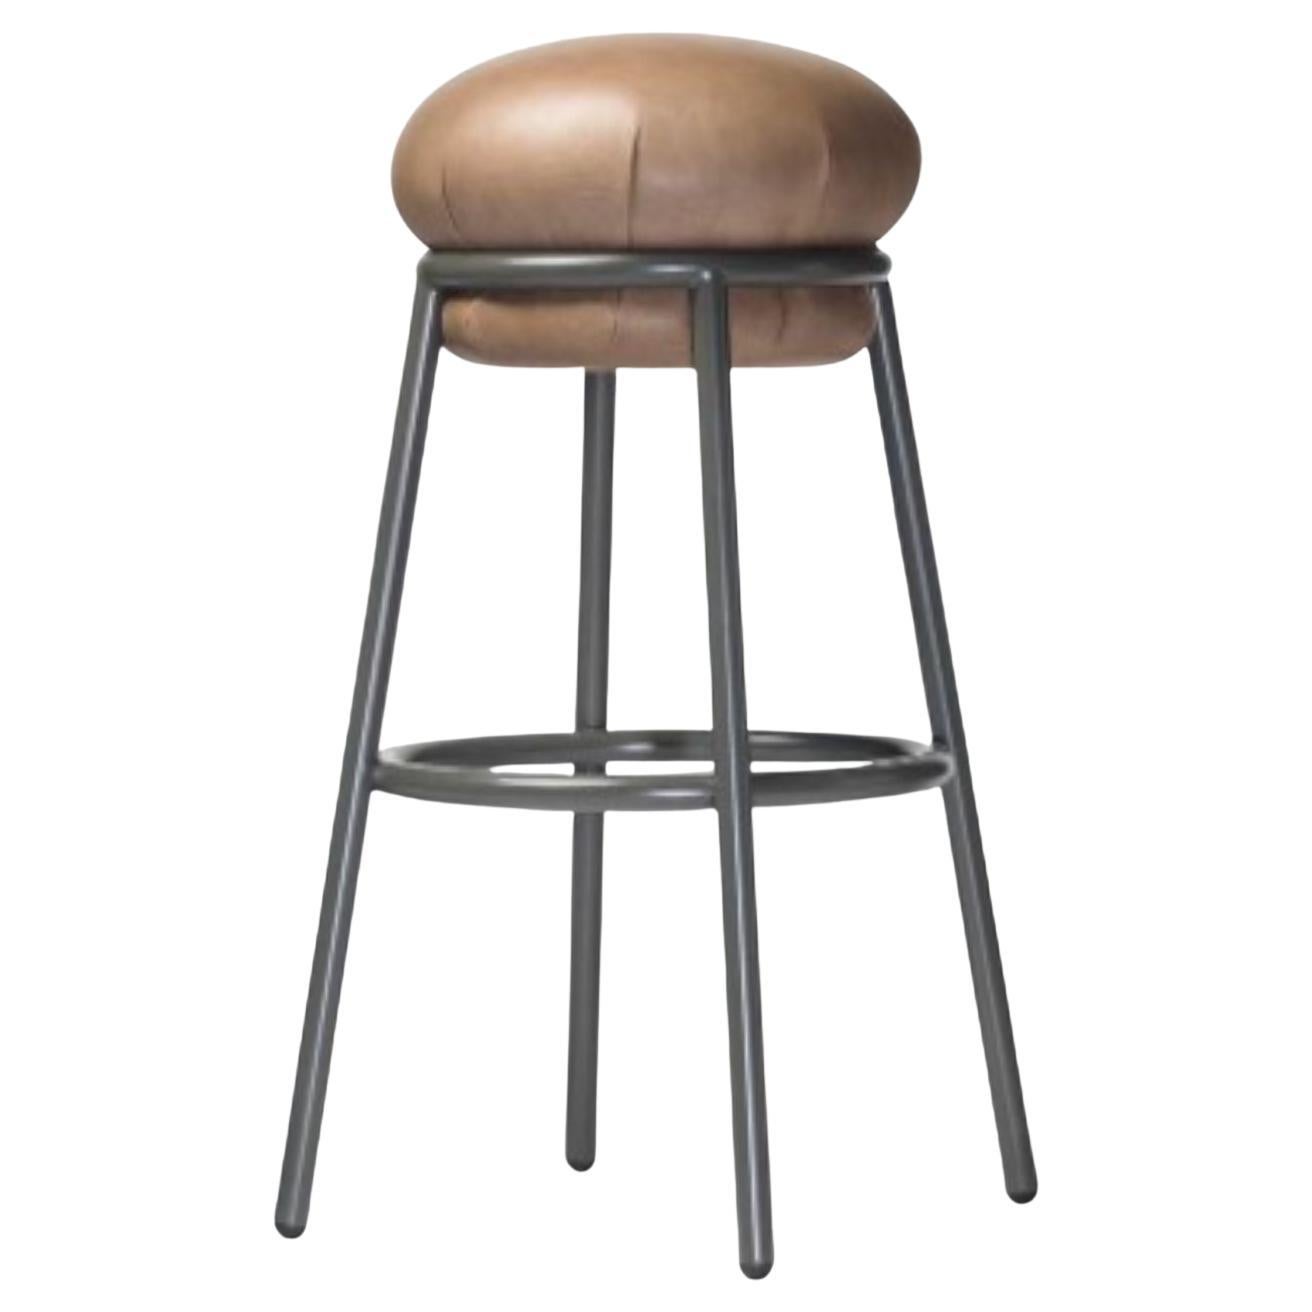 Grasso Brown Stool by Stephen Burks For Sale